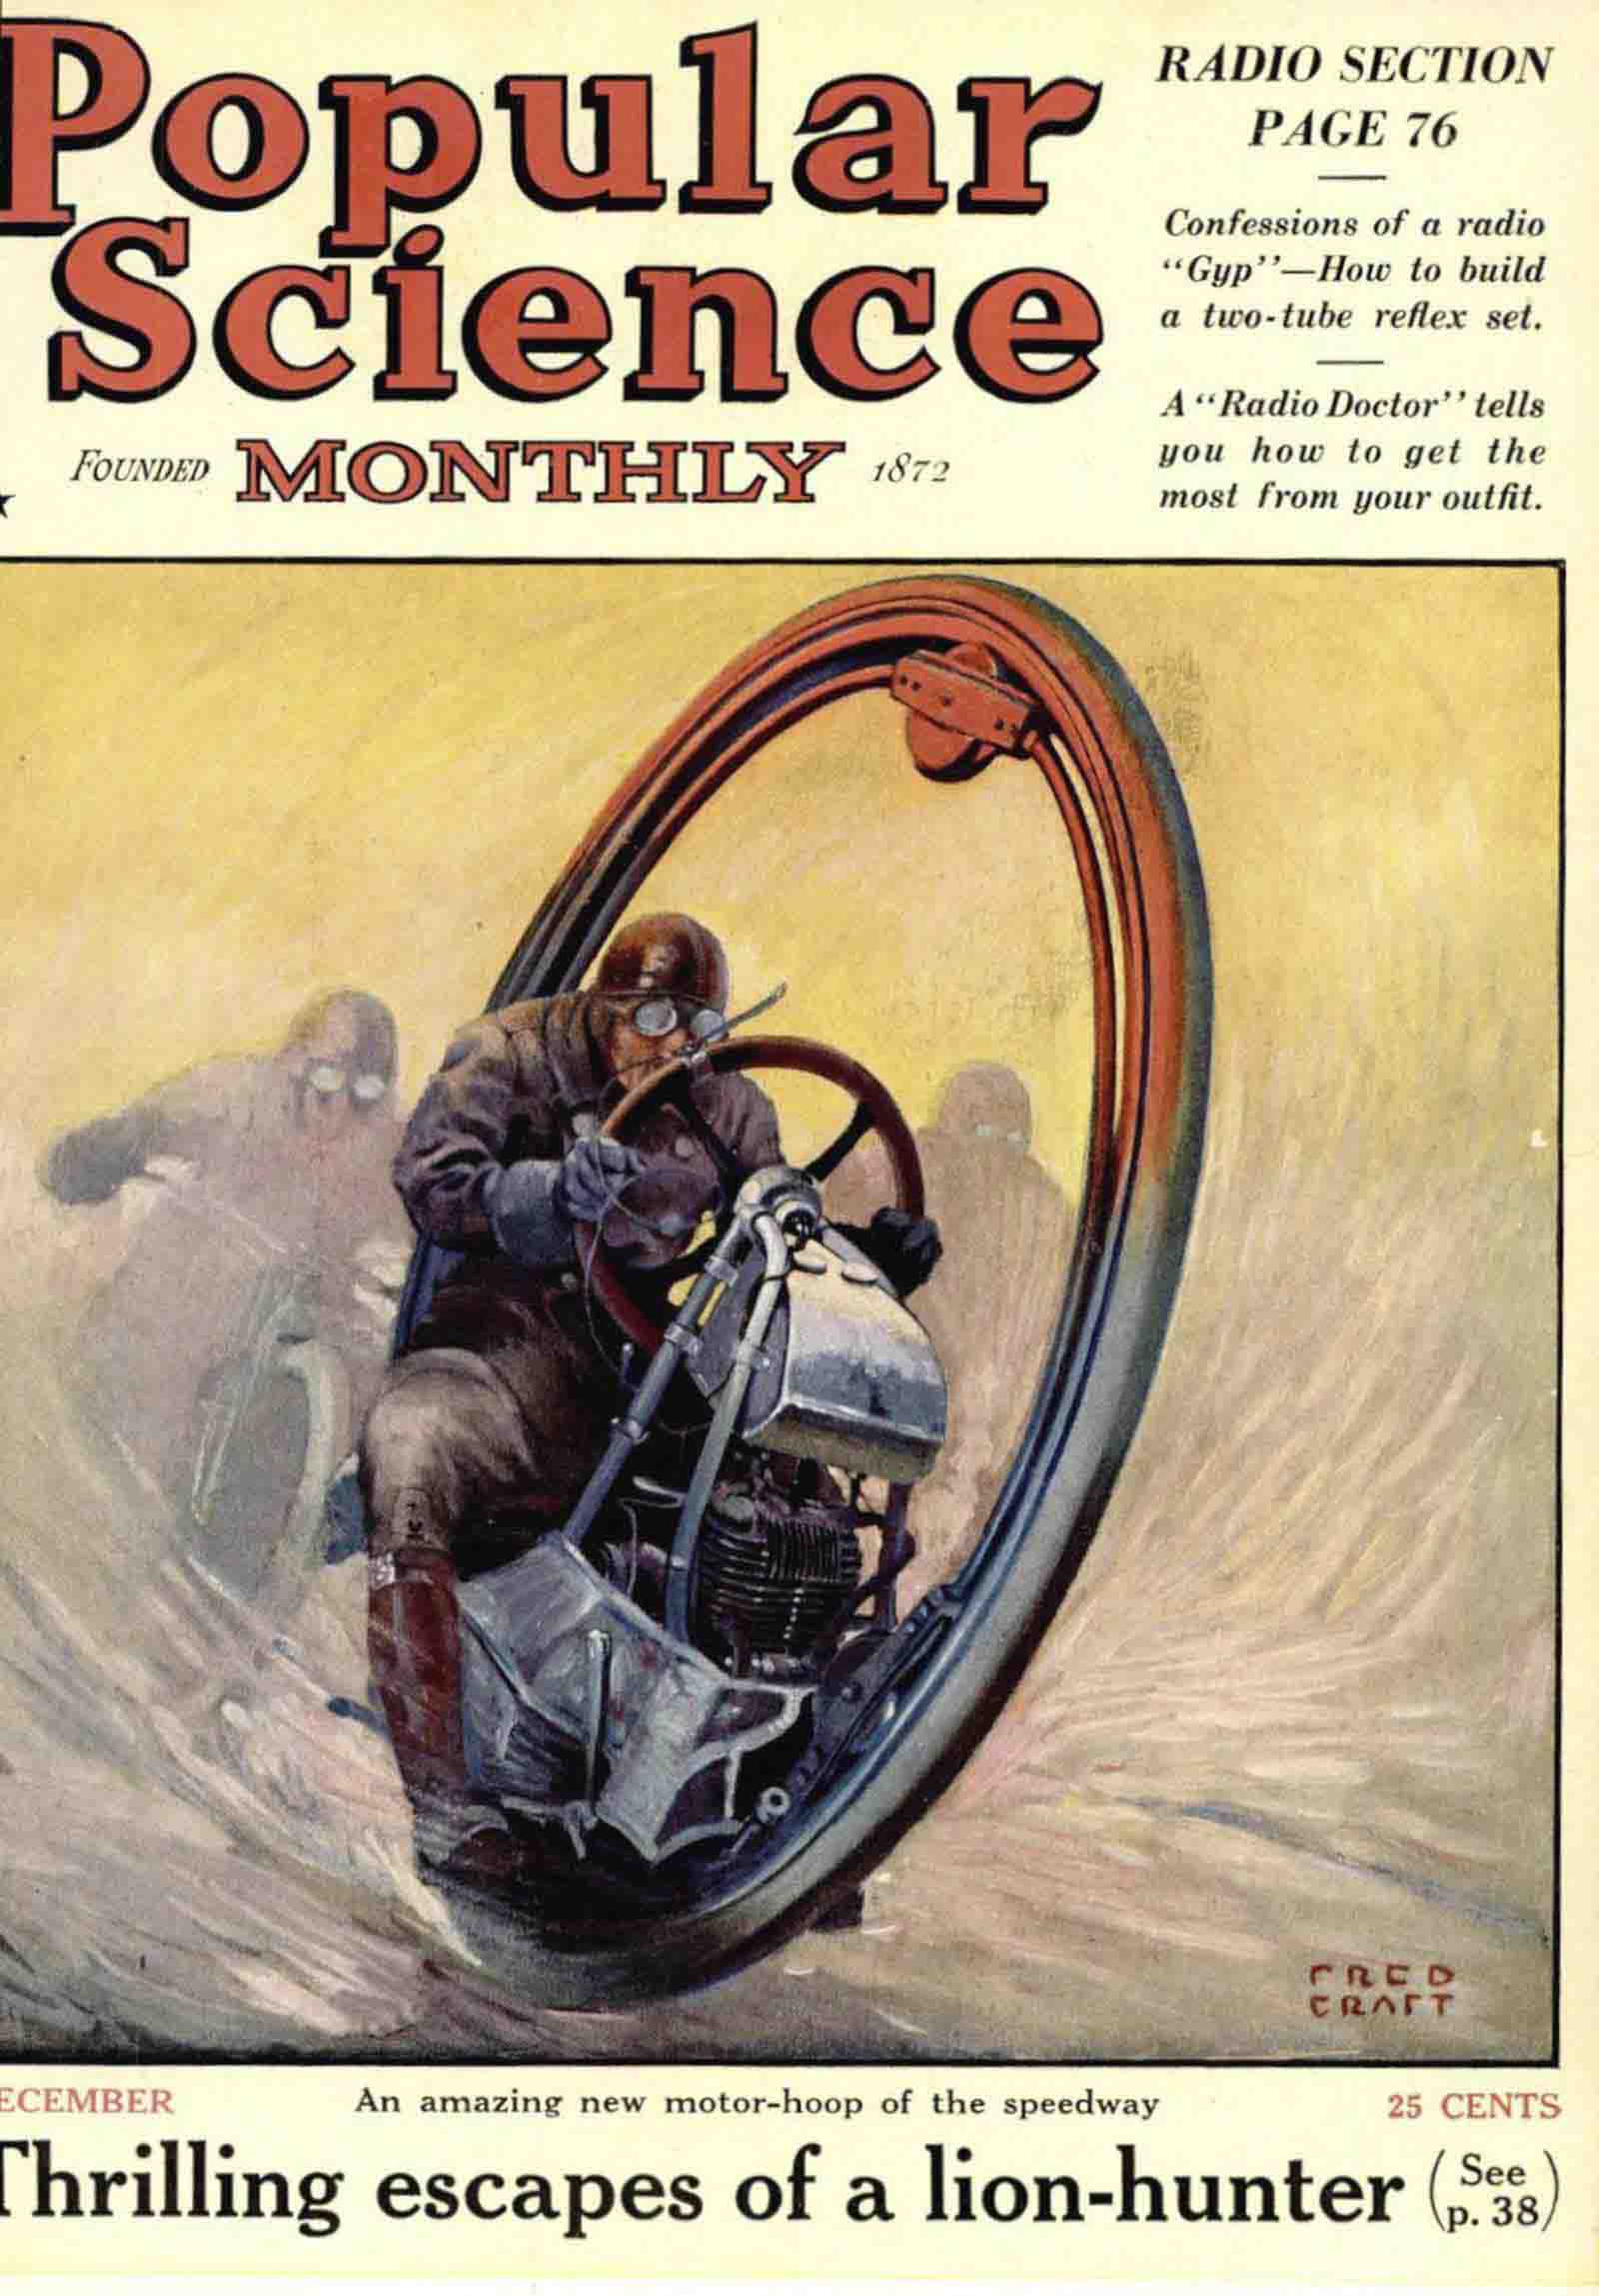 Monowheel: Facts and Historical Photos of the Bizarre Vehicle